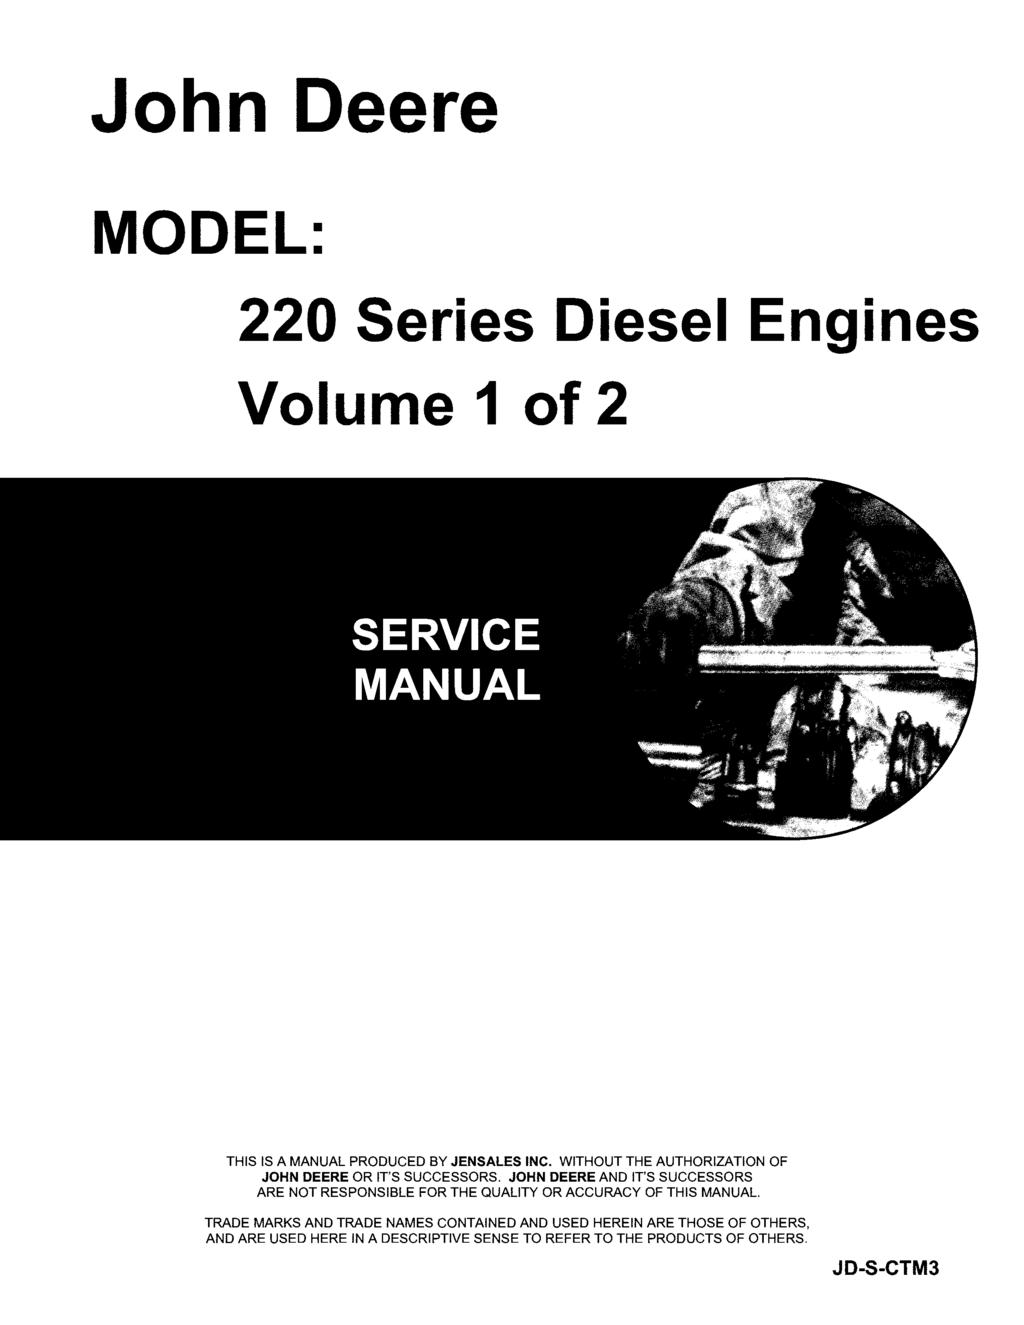 John Deere MODEL: 220 Series Diesel Engines Volume 1 of 2 THIS IS A MANUAL PRODUCED BY JENSALES INC. WITHOUT THE AUTHORIZATION OF JOHN DEERE OR IT'S SUCCESSORS.